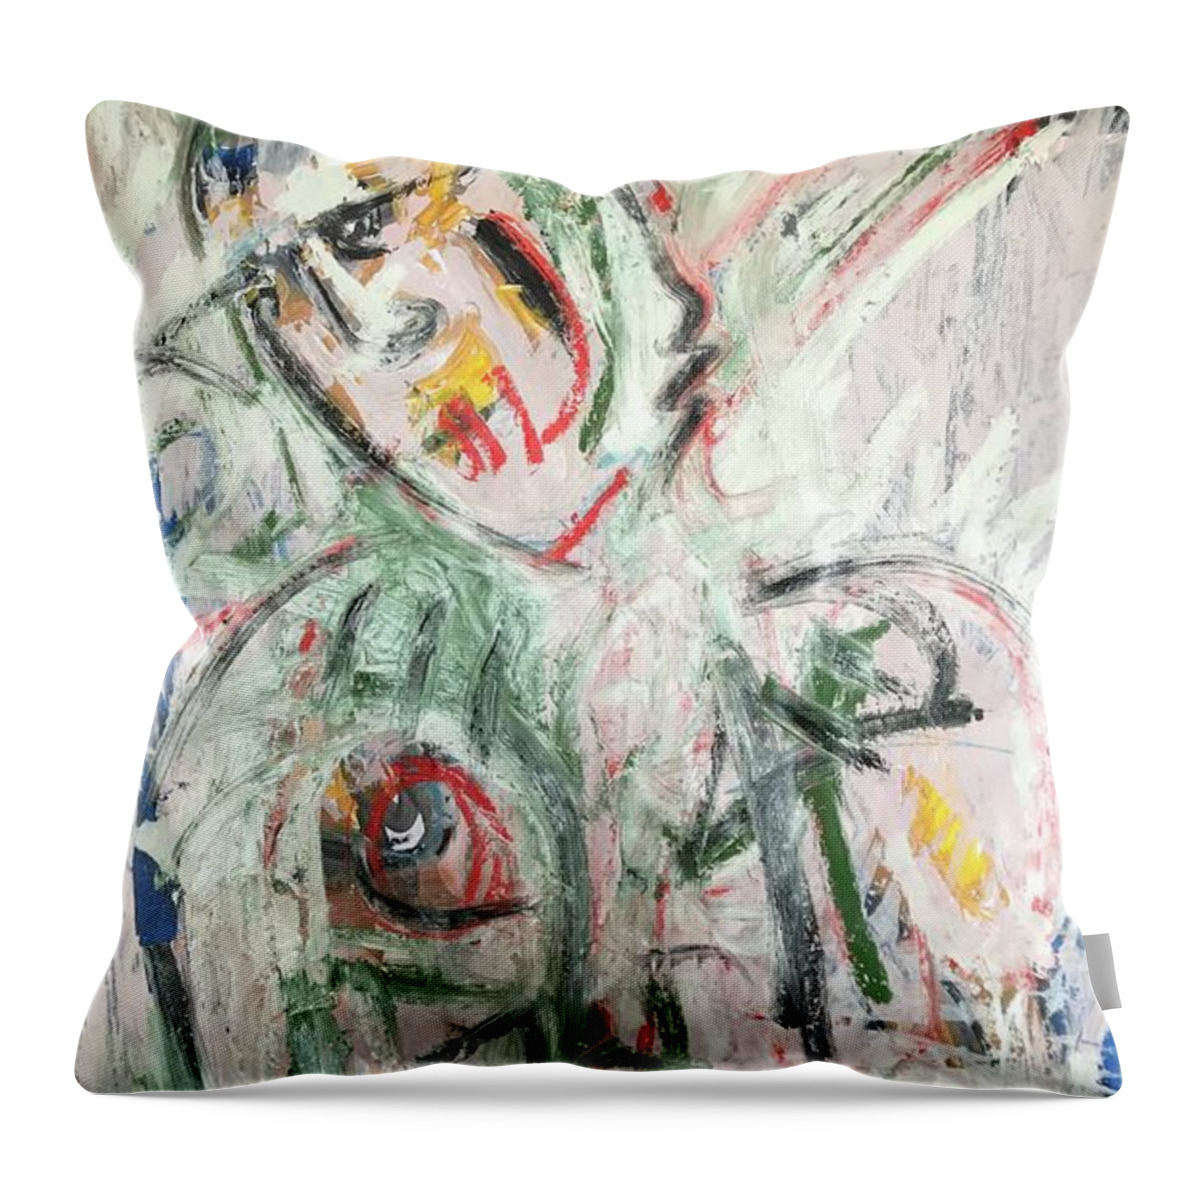 Abstract Throw Pillow featuring the painting Contemplating What Is by Gustavo Ramirez